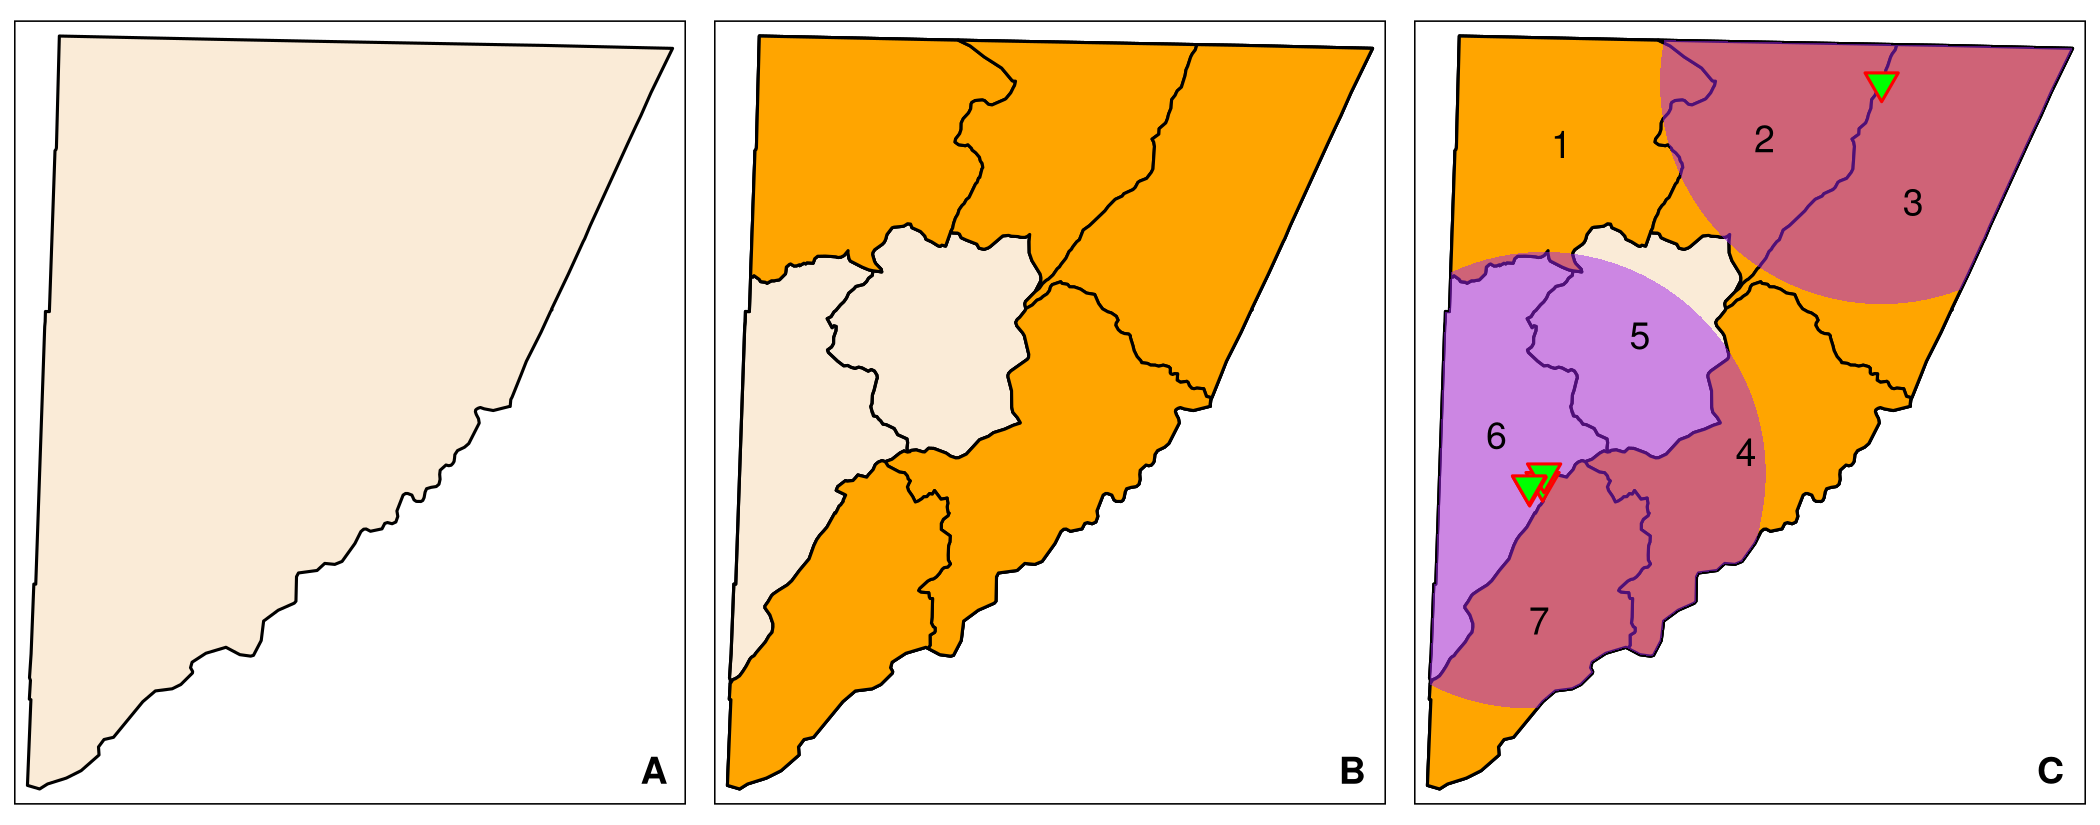 Three maps of Garrett County showing its boundaries, low-income rural areas, and vaccination sites